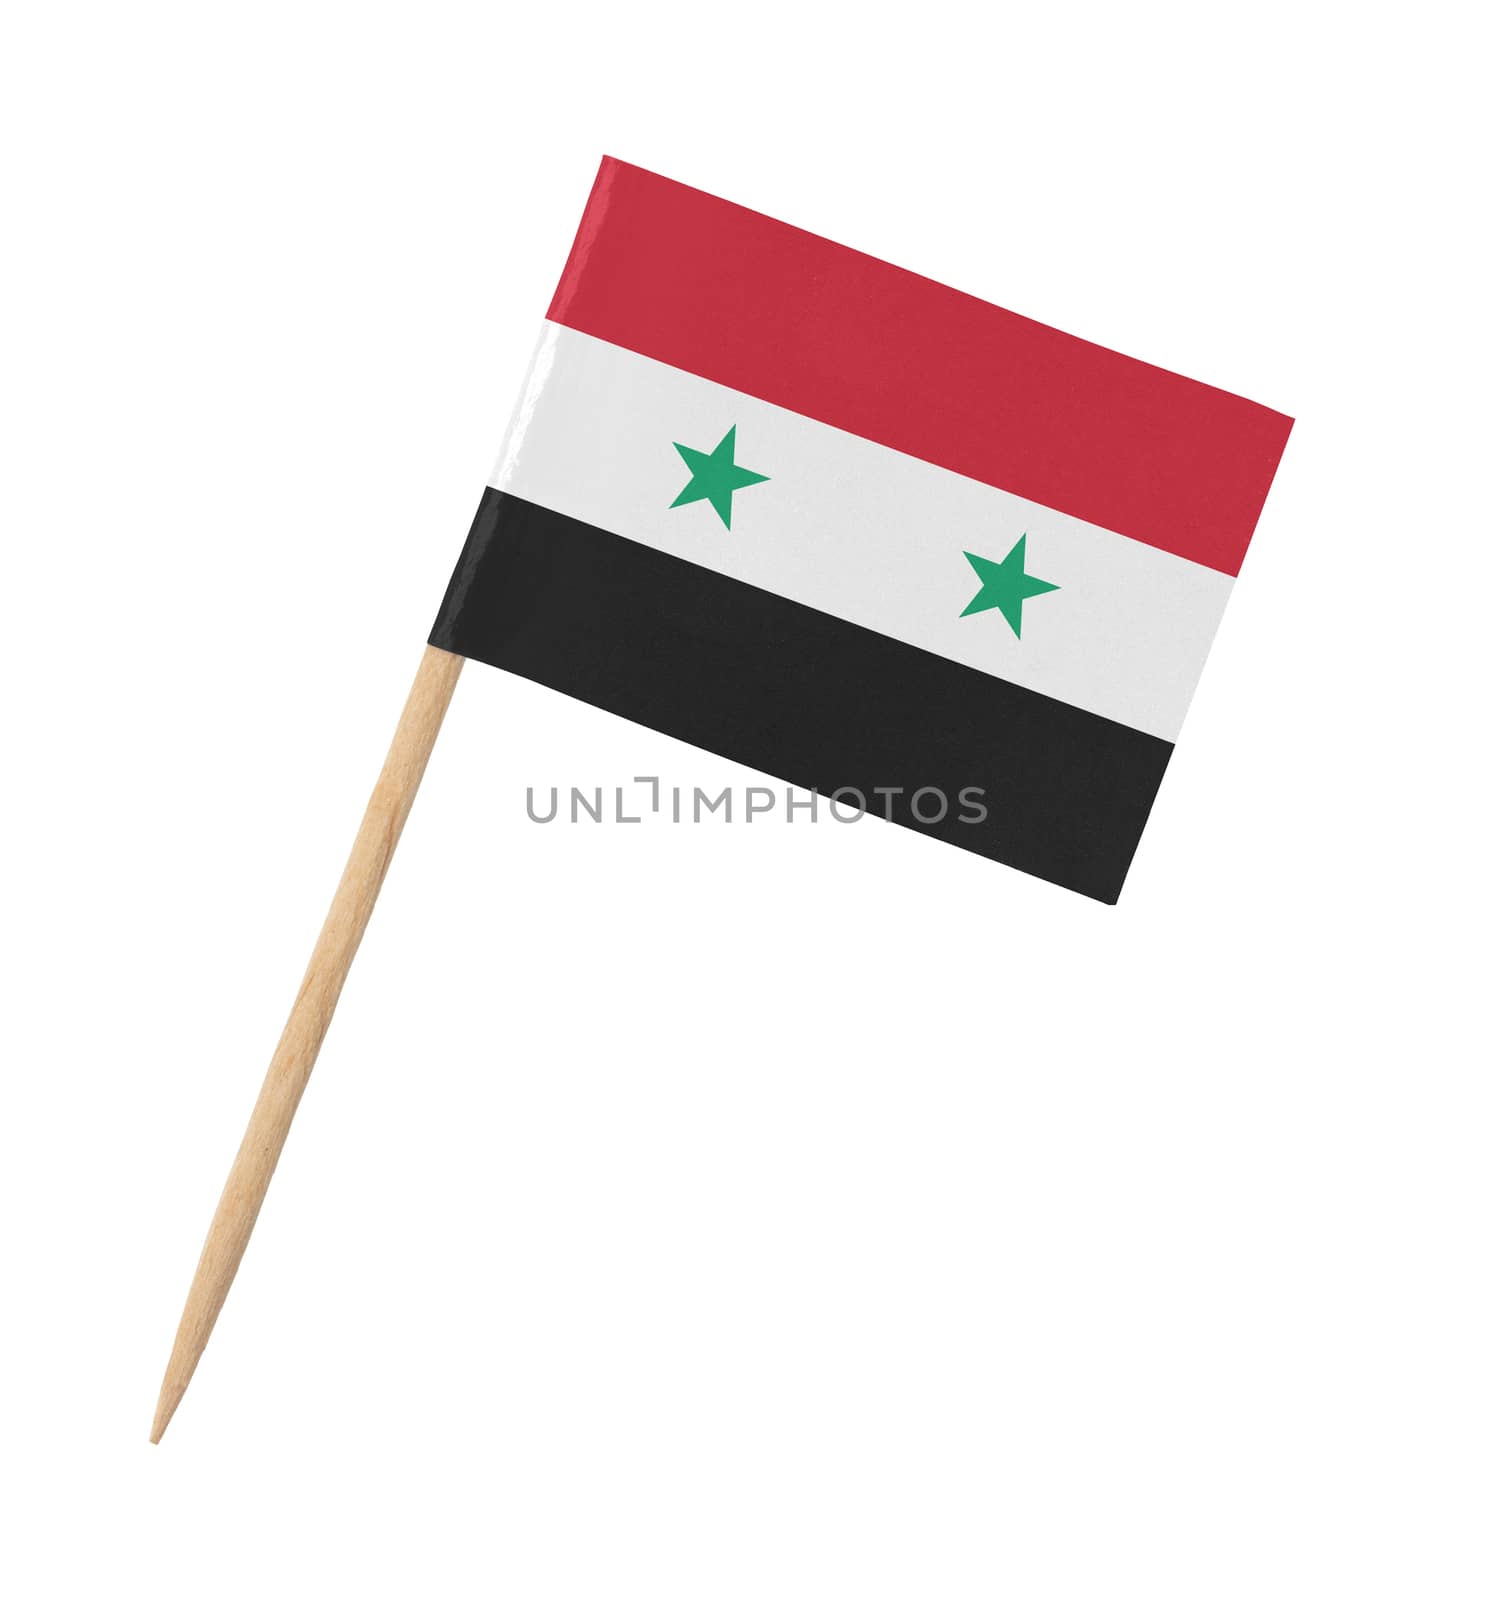 Small paper Syrian flag on wooden stick by michaklootwijk